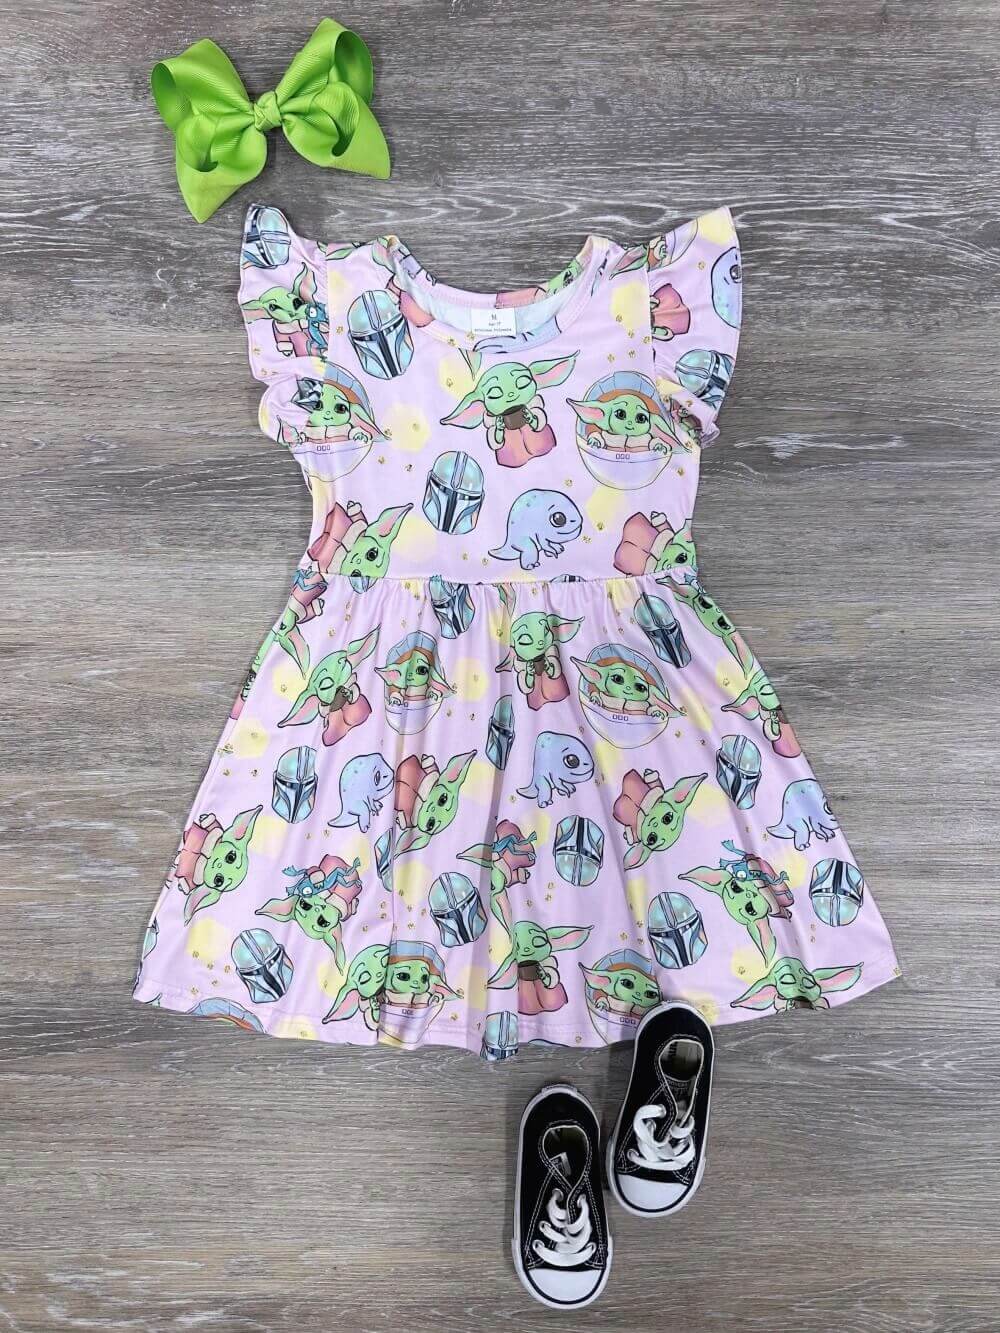 The Force is Strong Baby Alien Girls Short Sleeve Dress - Sydney So Sweet